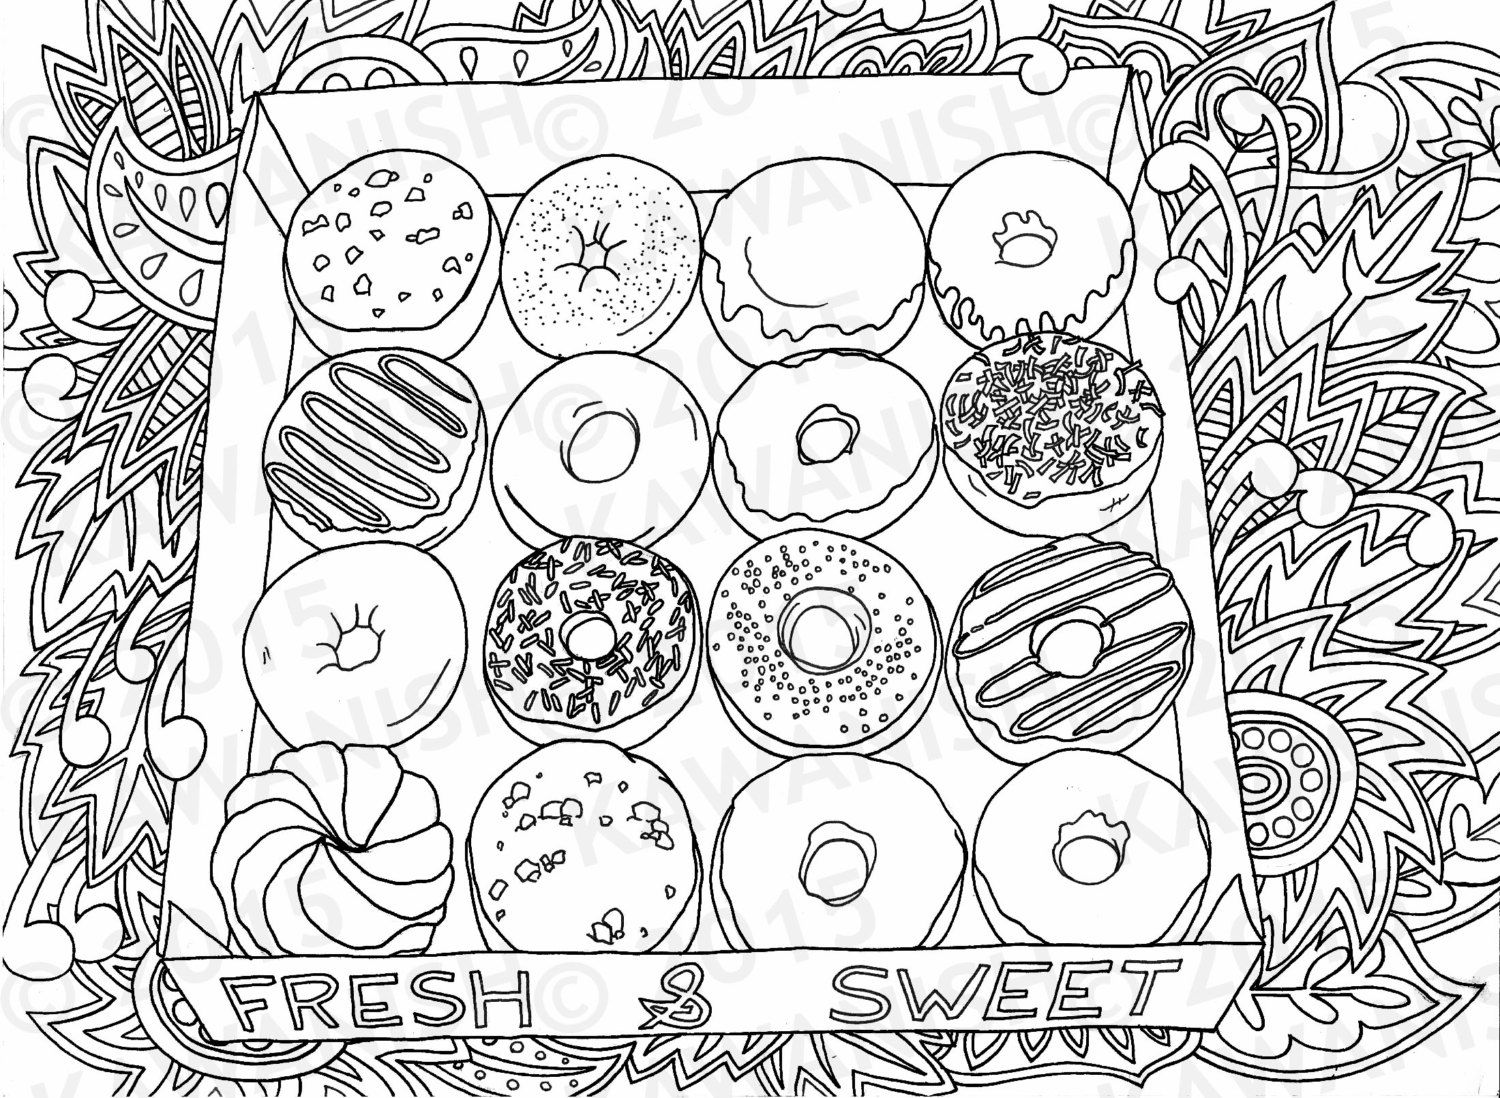 donuts doughnuts adult coloring page gift wall art by ...